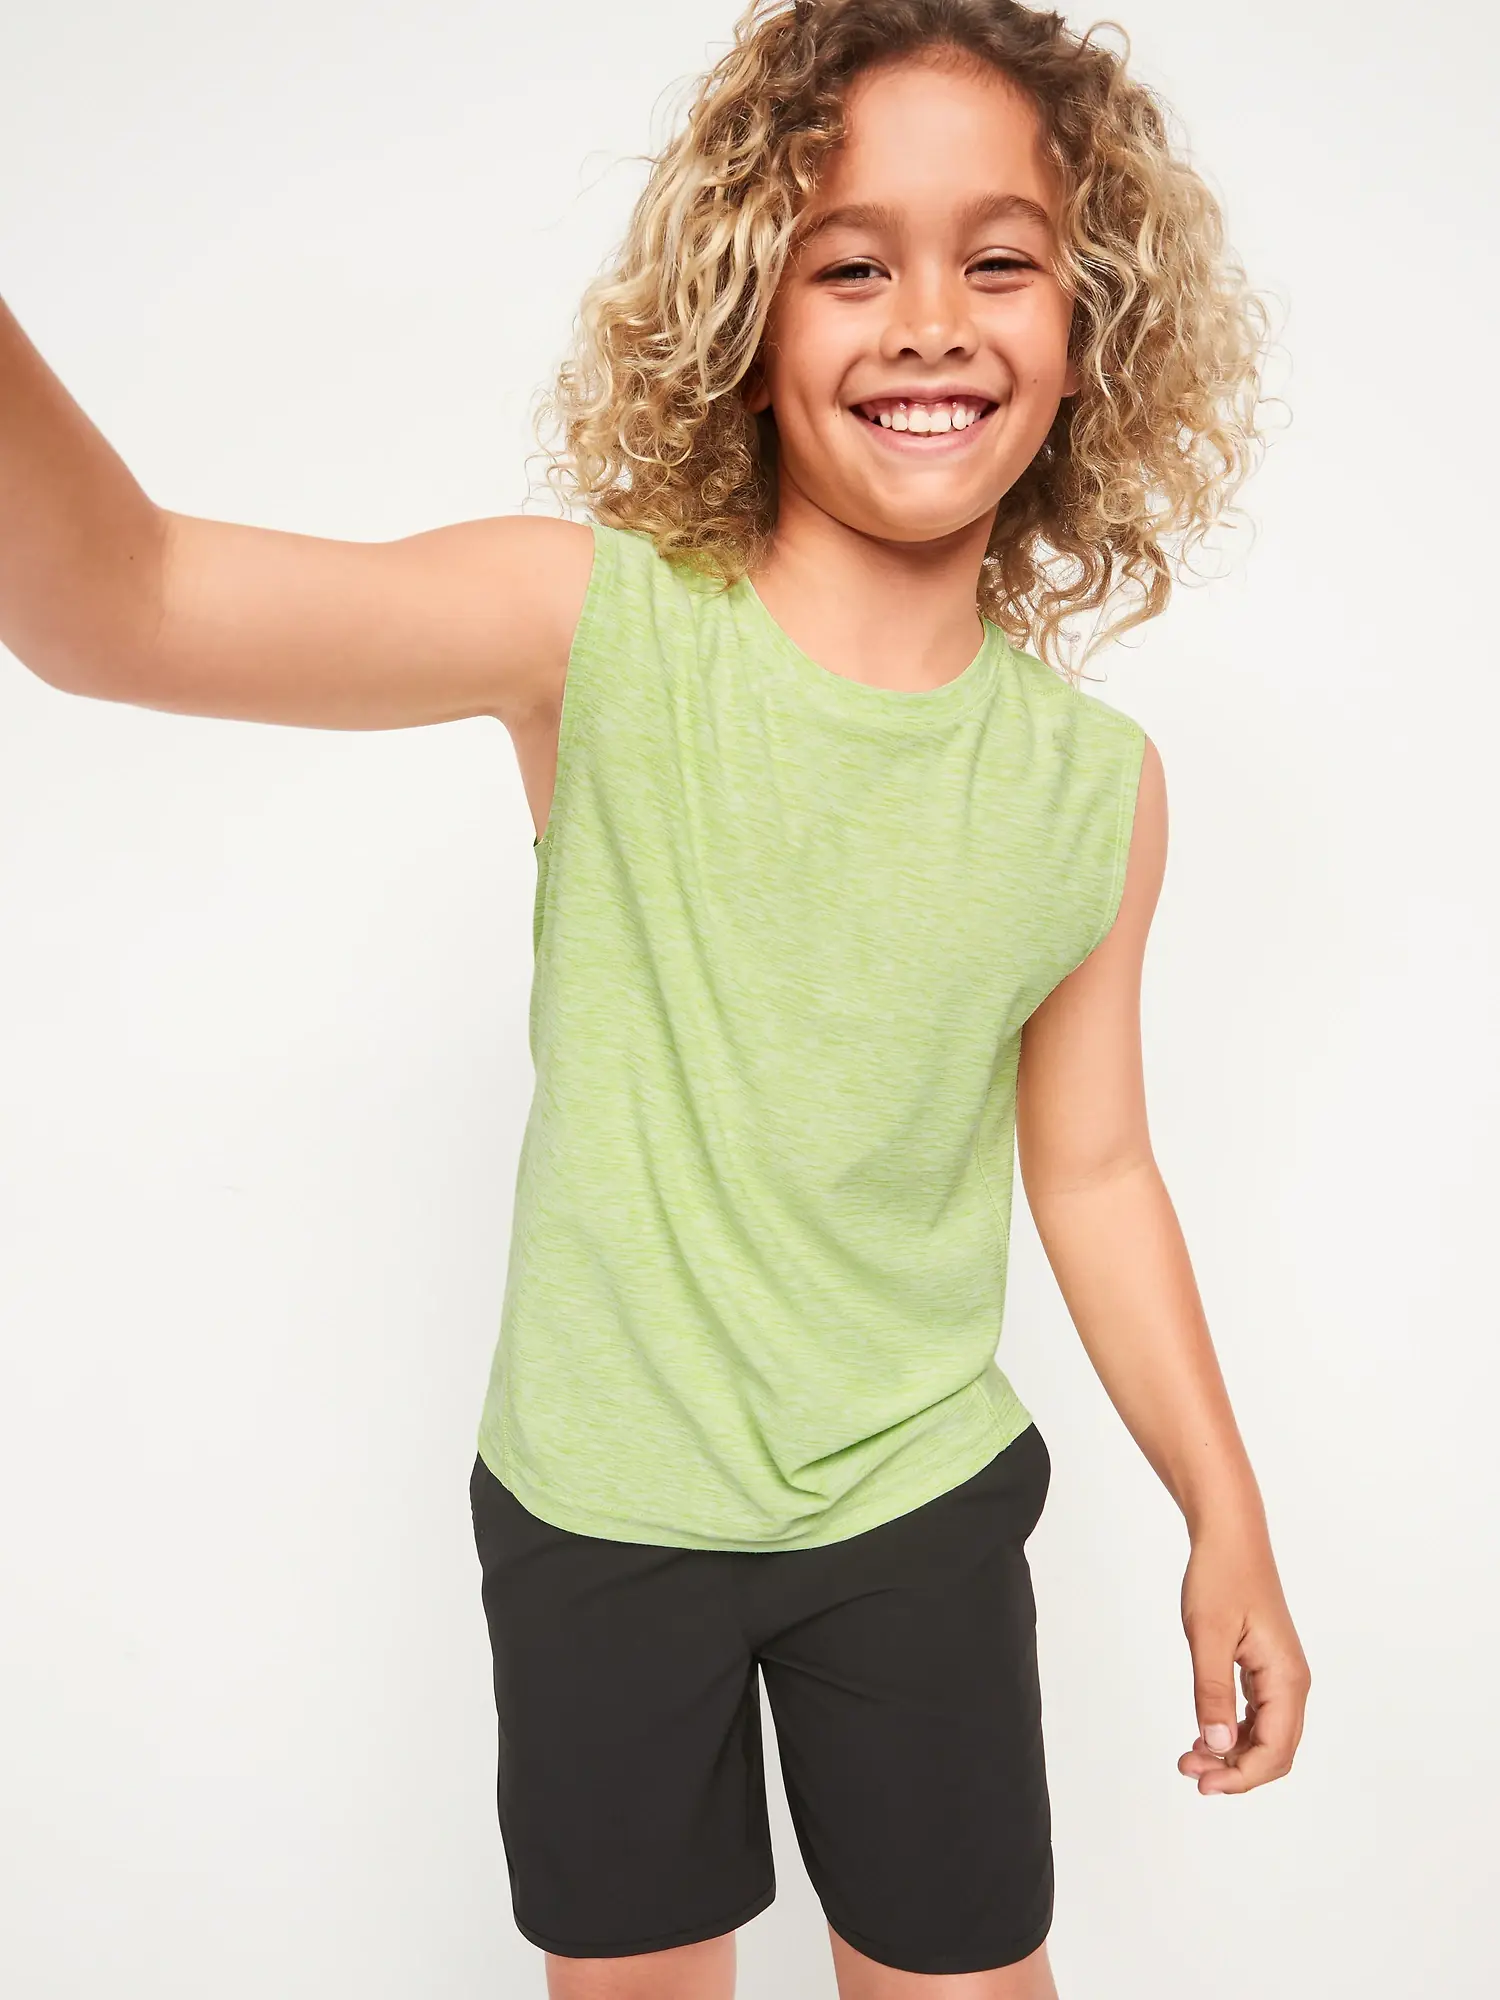 Old Navy Breathe ON Performance Tank Top for Boys green. 1